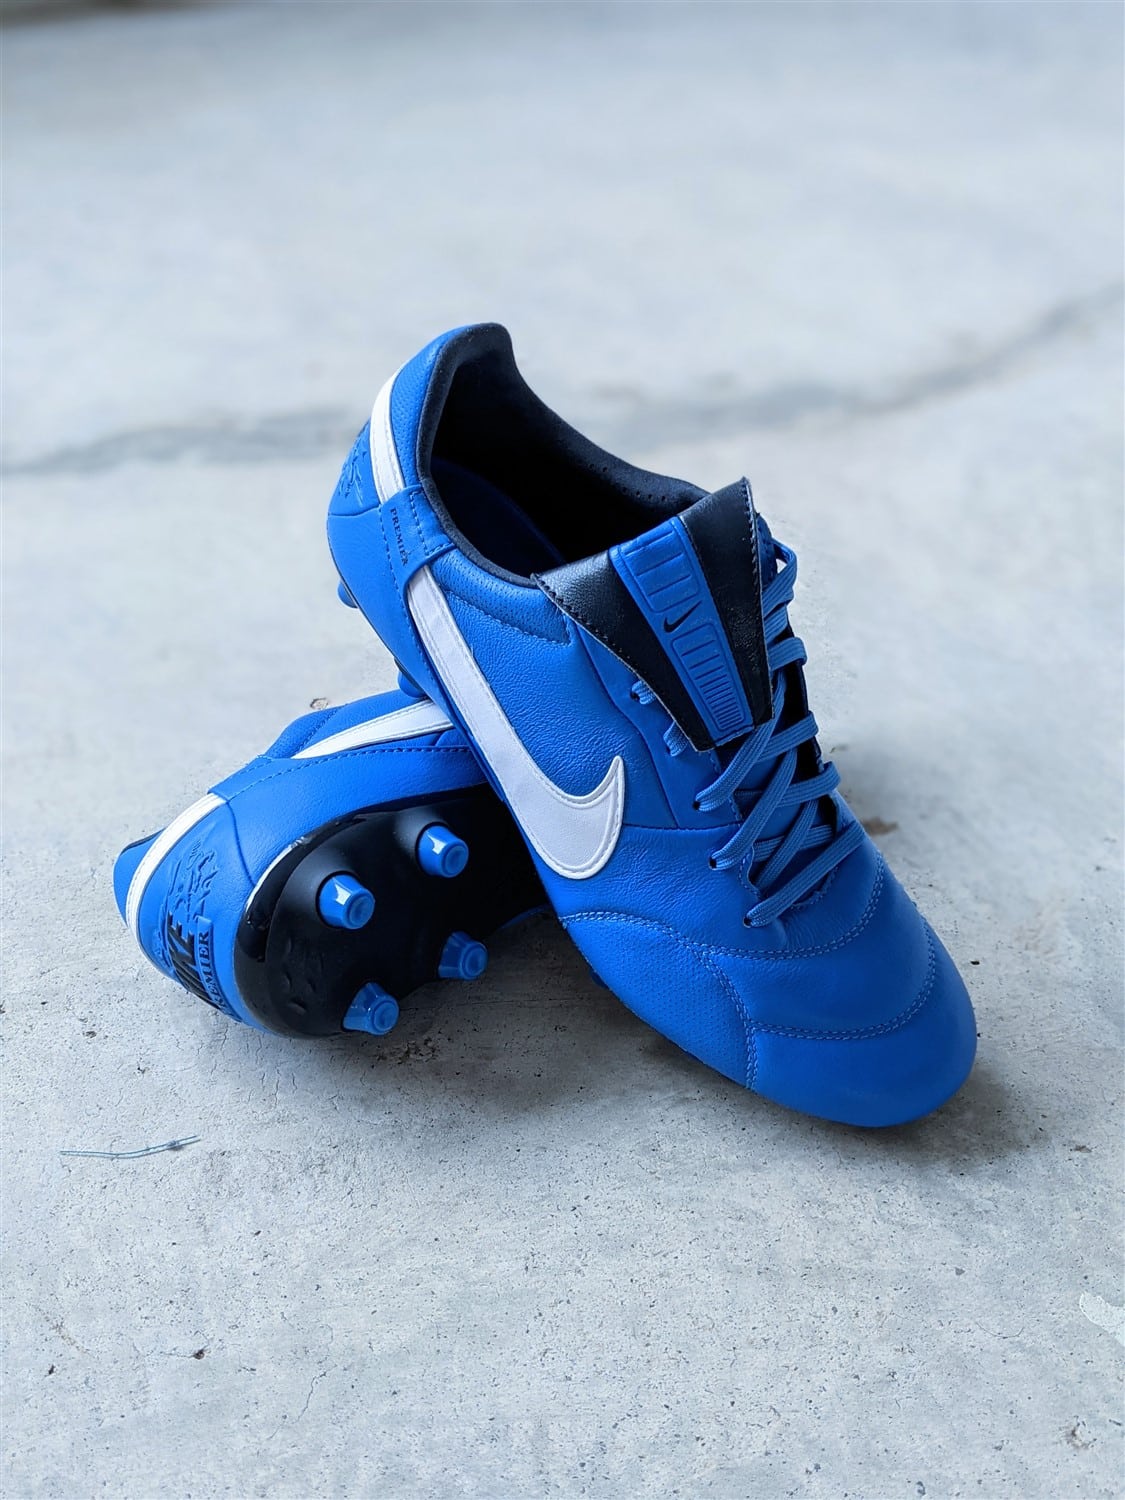 nike-premier-3.0-football boot review-boothype